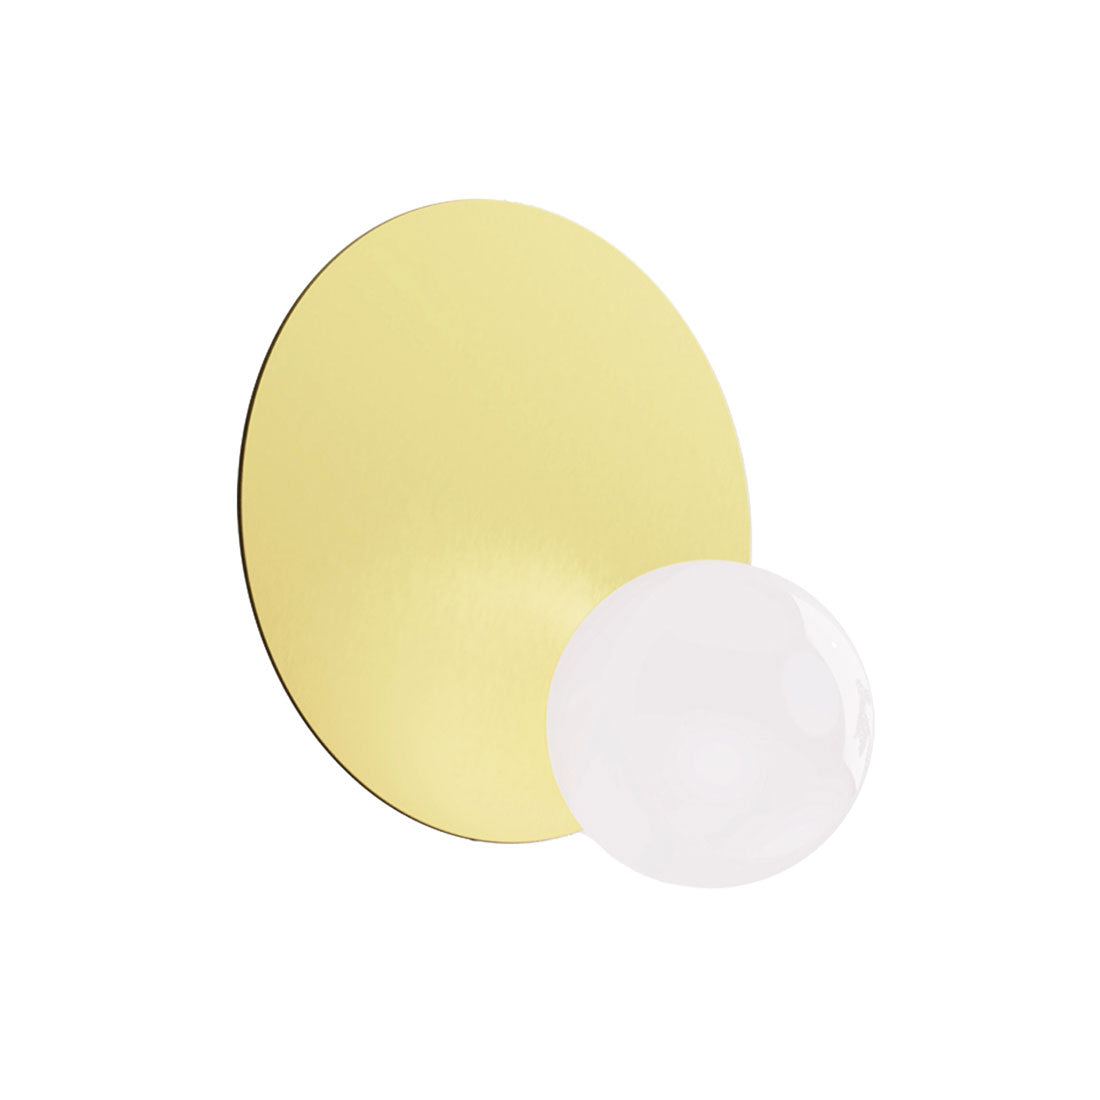 The Pimlico Sealed Dot Off-Centre contemporary wall light is a glass shade mounted off centre on a mirror